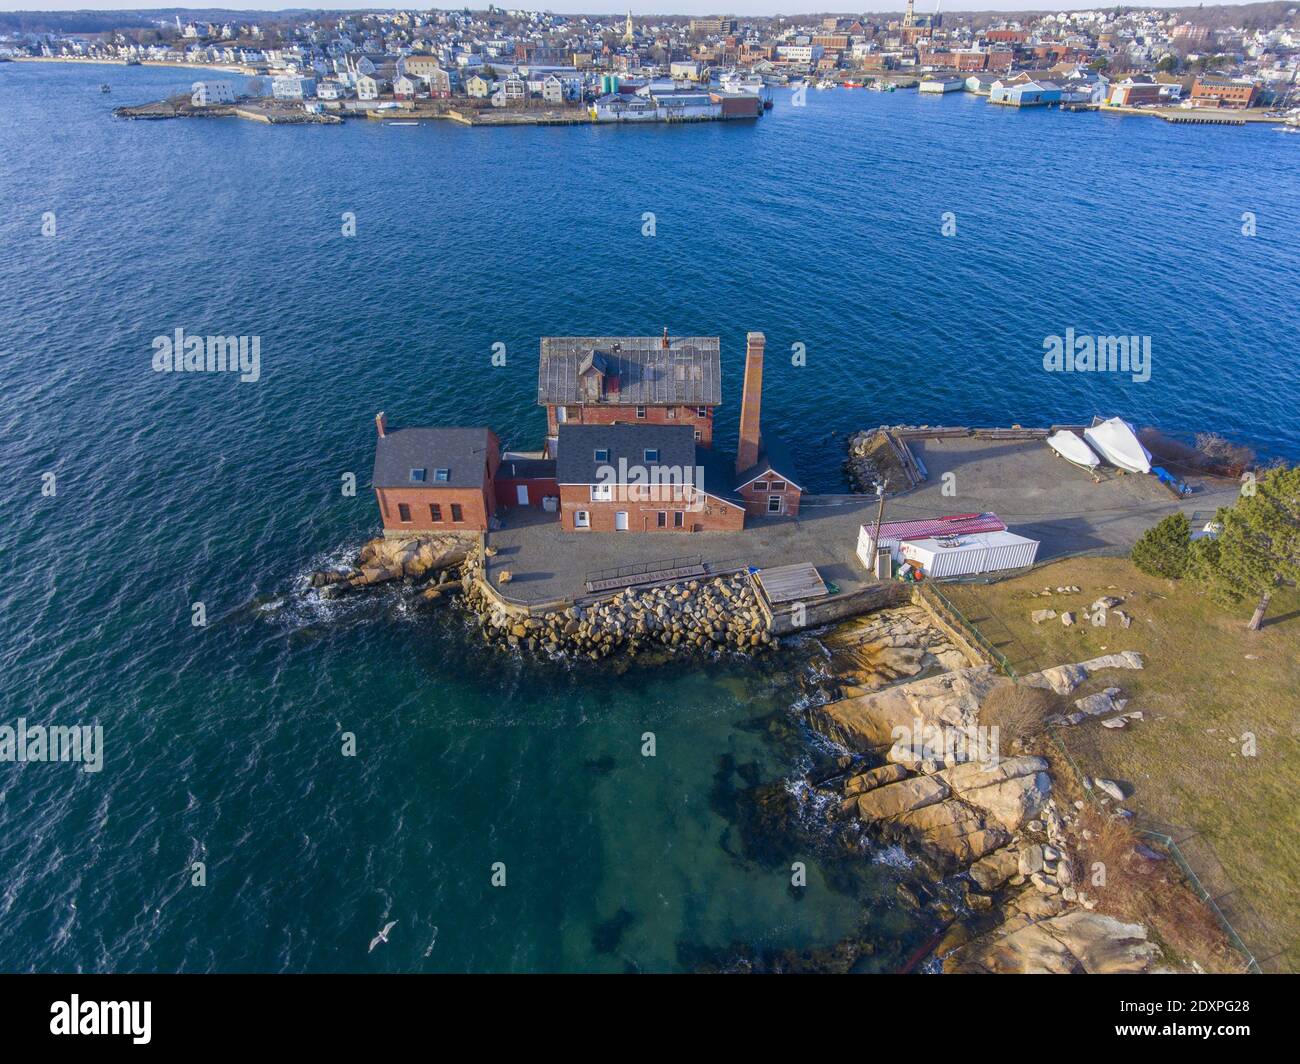 Aerial view of historic Paint Factory in Gloucester Harbor, Cape Ann, Massachusetts, USA. Stock Photo